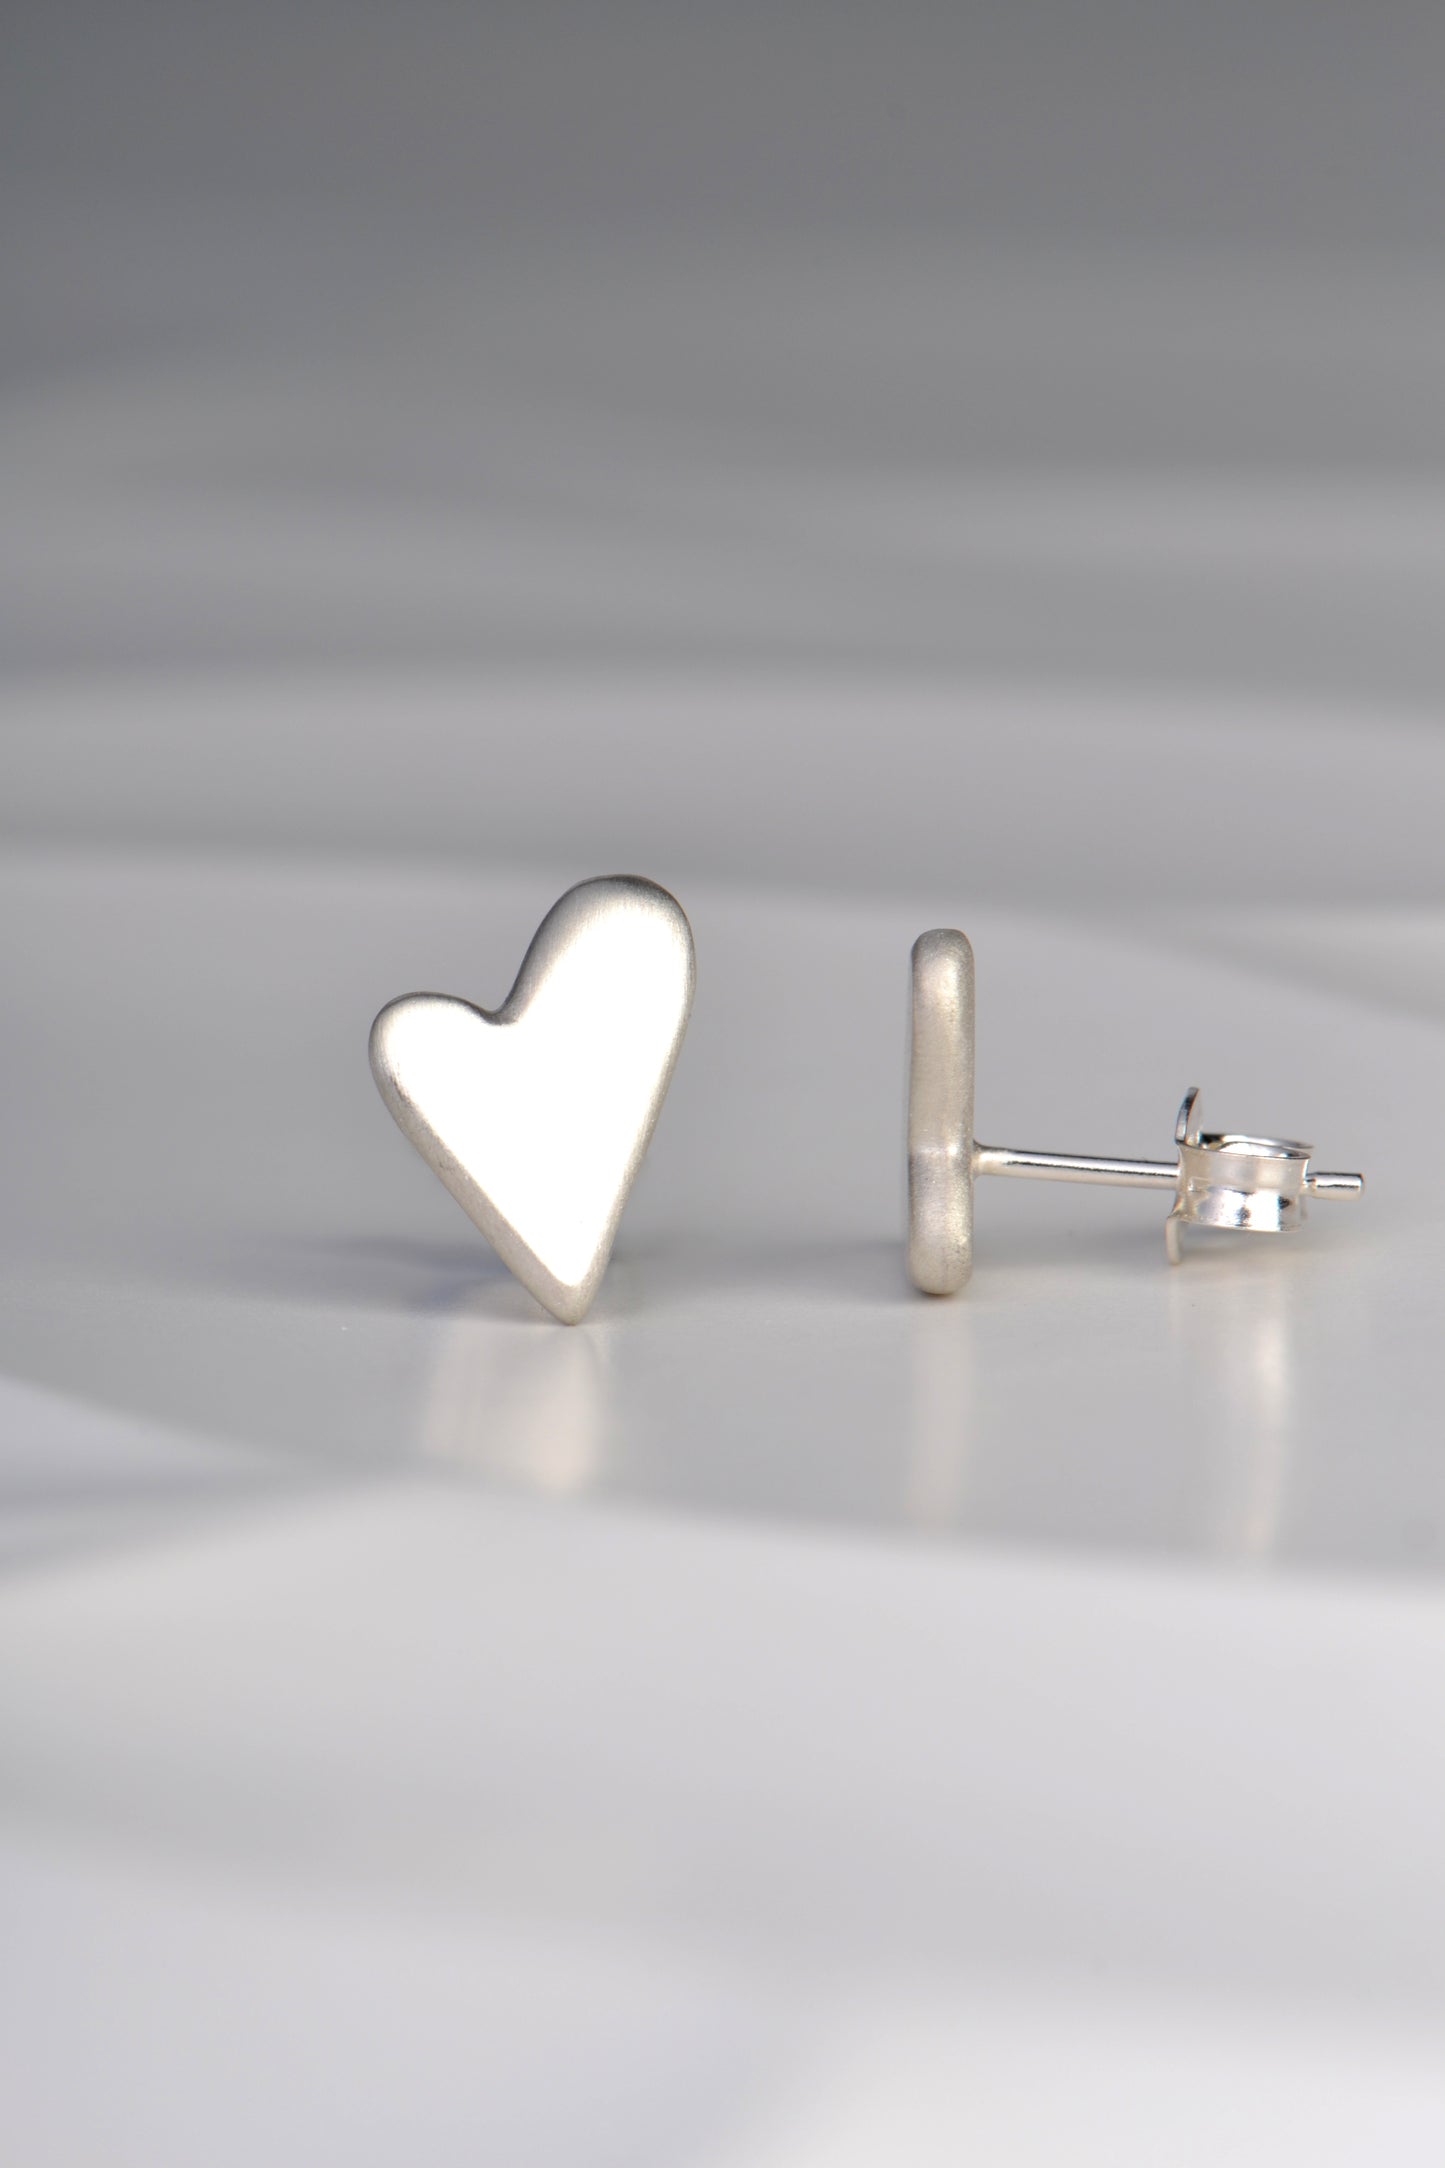 These designer heart shaped earrings sit flat to the earlobe and are very comfortable to wear